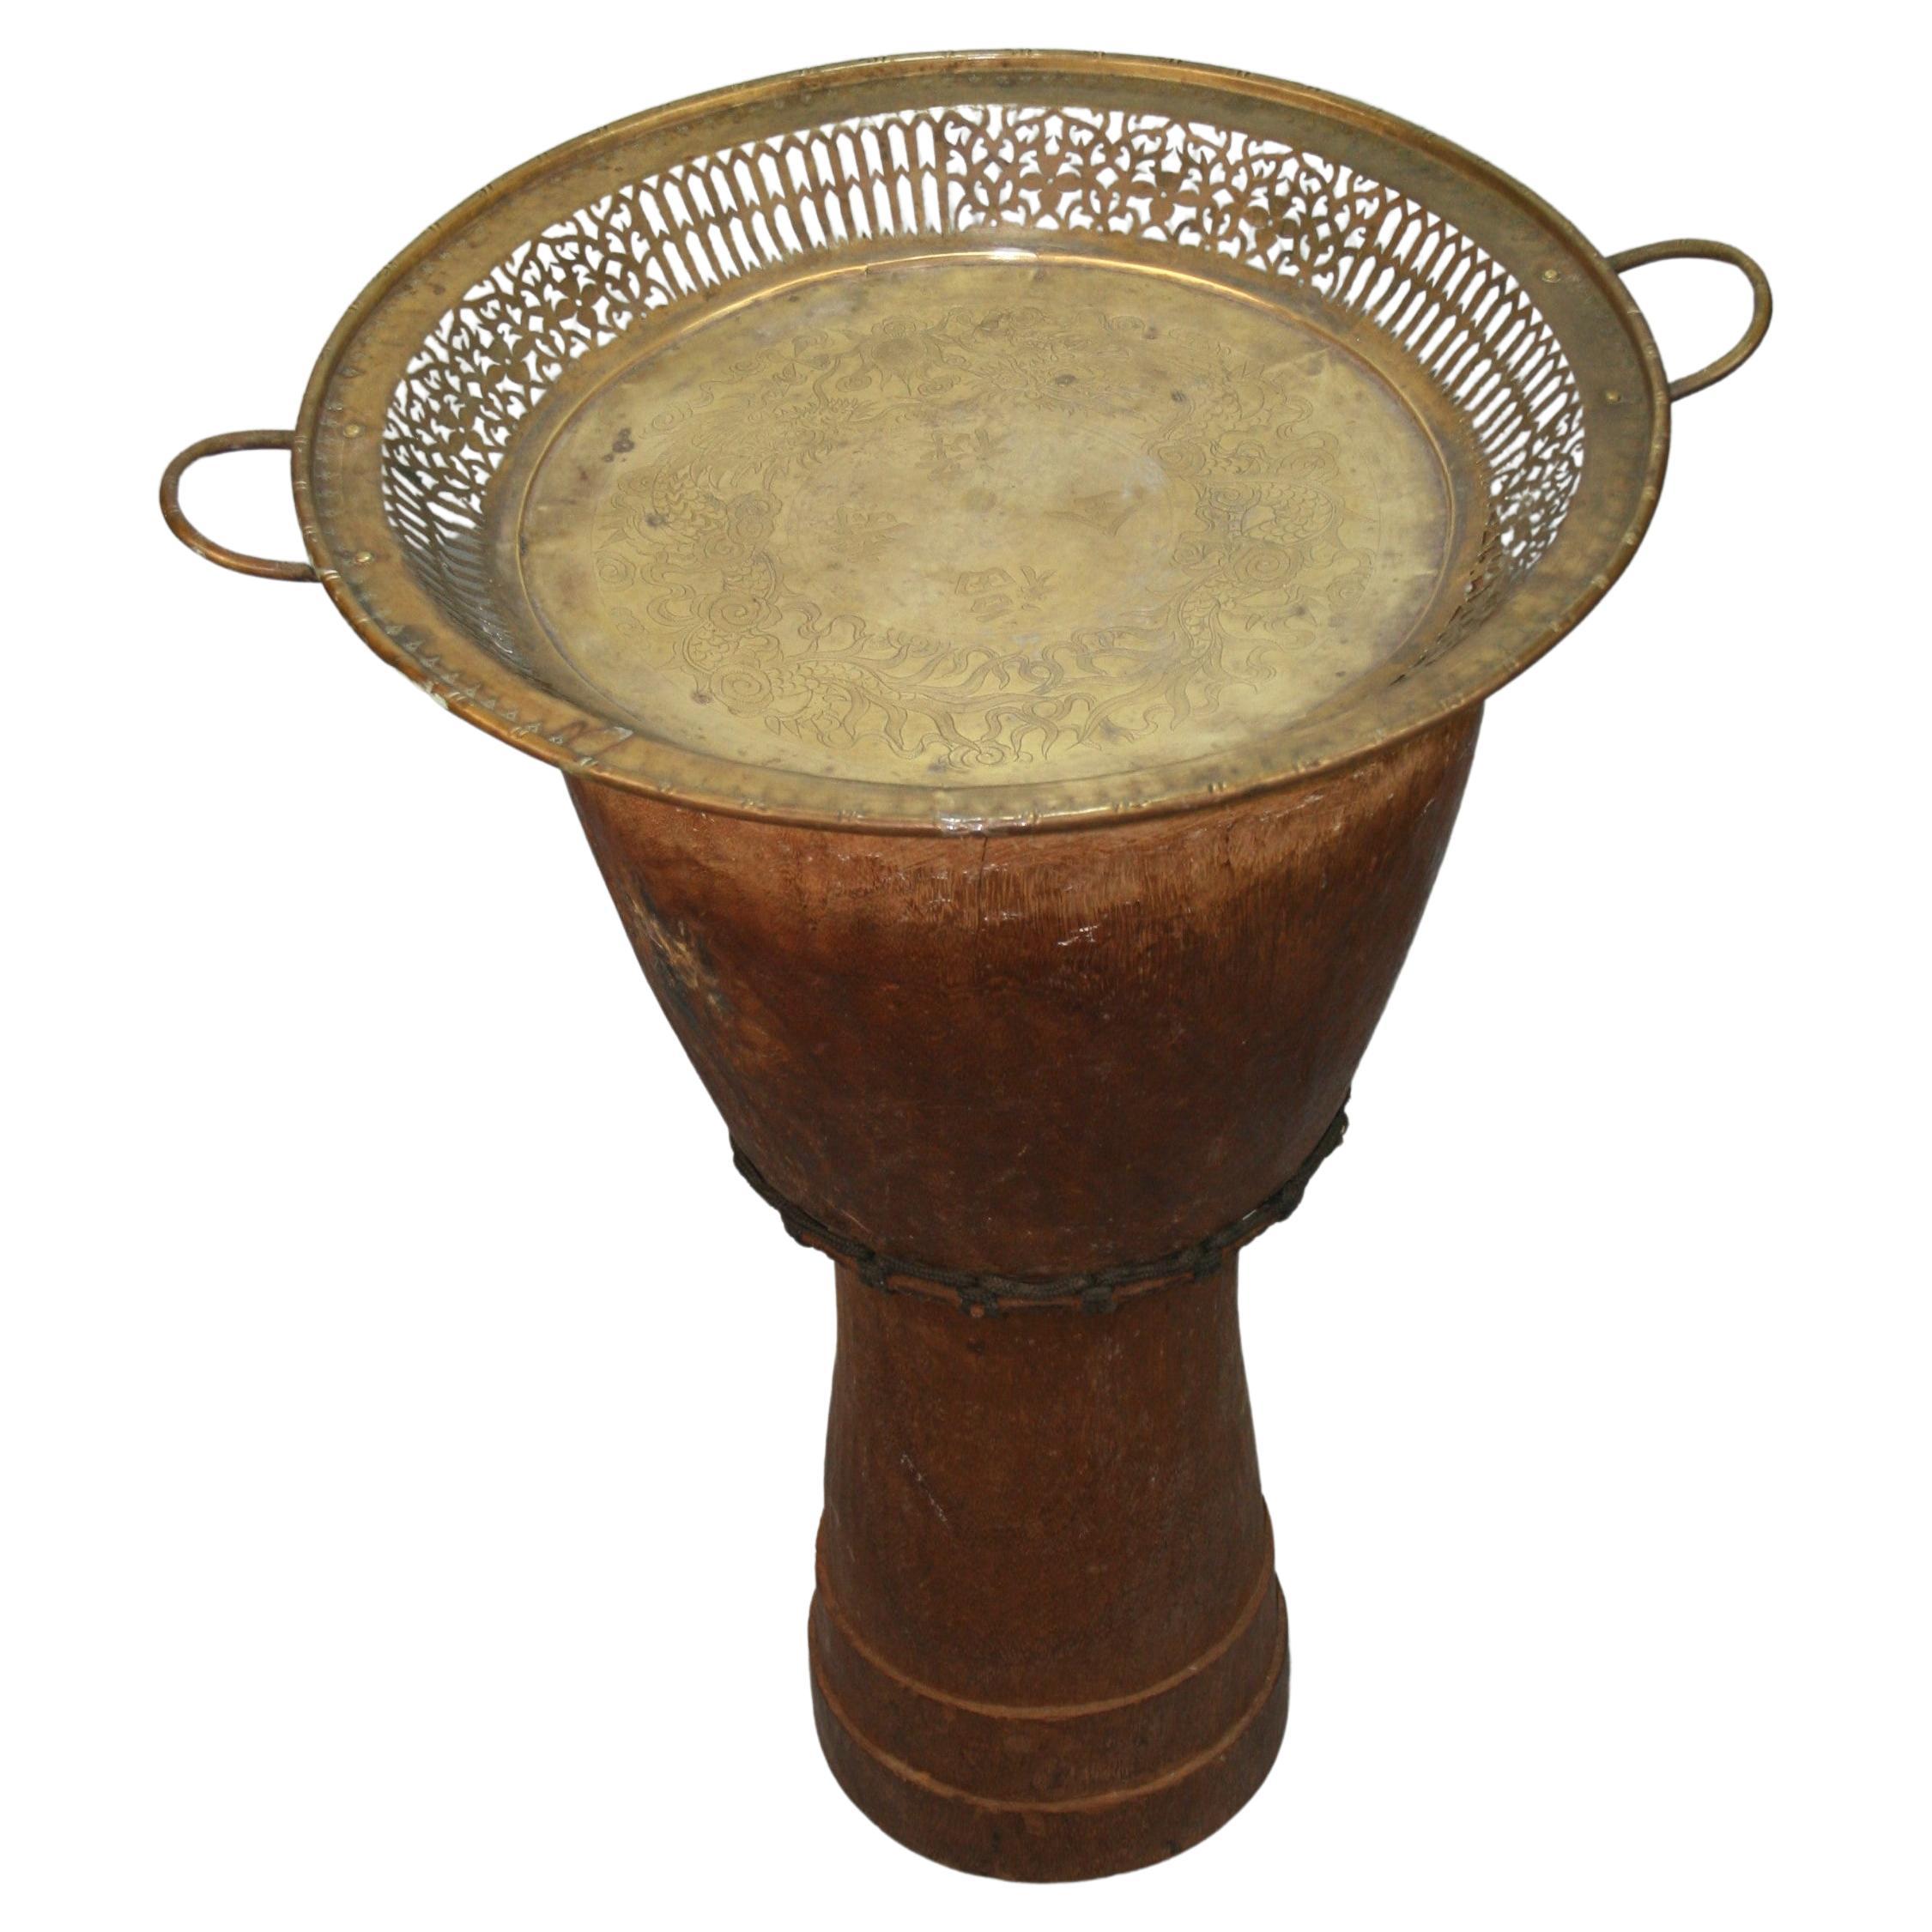 Japanese drum planter with latter added removable brass tray
Has metal and rope banding on middle.